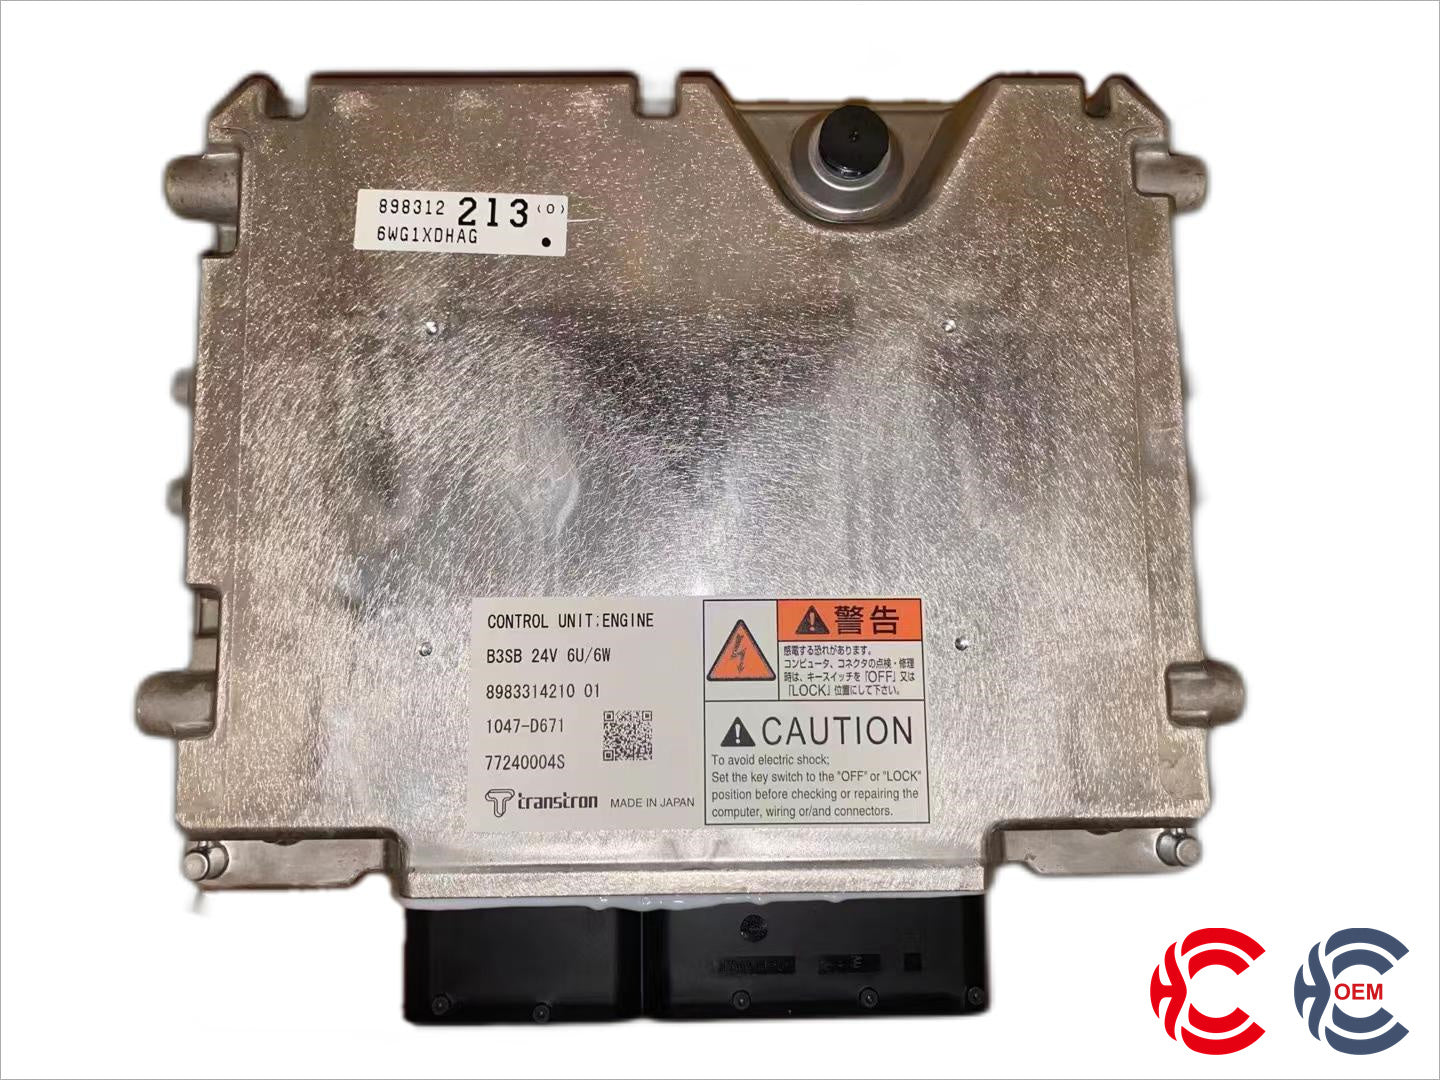 OEM: 8983314210 1047-D671 77240004SMaterial: MetalColor: SilverOrigin: Made in ChinaWeight: 1500gPacking List: 1* ECU Diesel Engine More ServiceWe can provide OEM Manufacturing serviceWe can Be your one-step solution for Auto PartsWe can provide technical scheme for you Feel Free to Contact Us, We will get back to you as soon as possible.